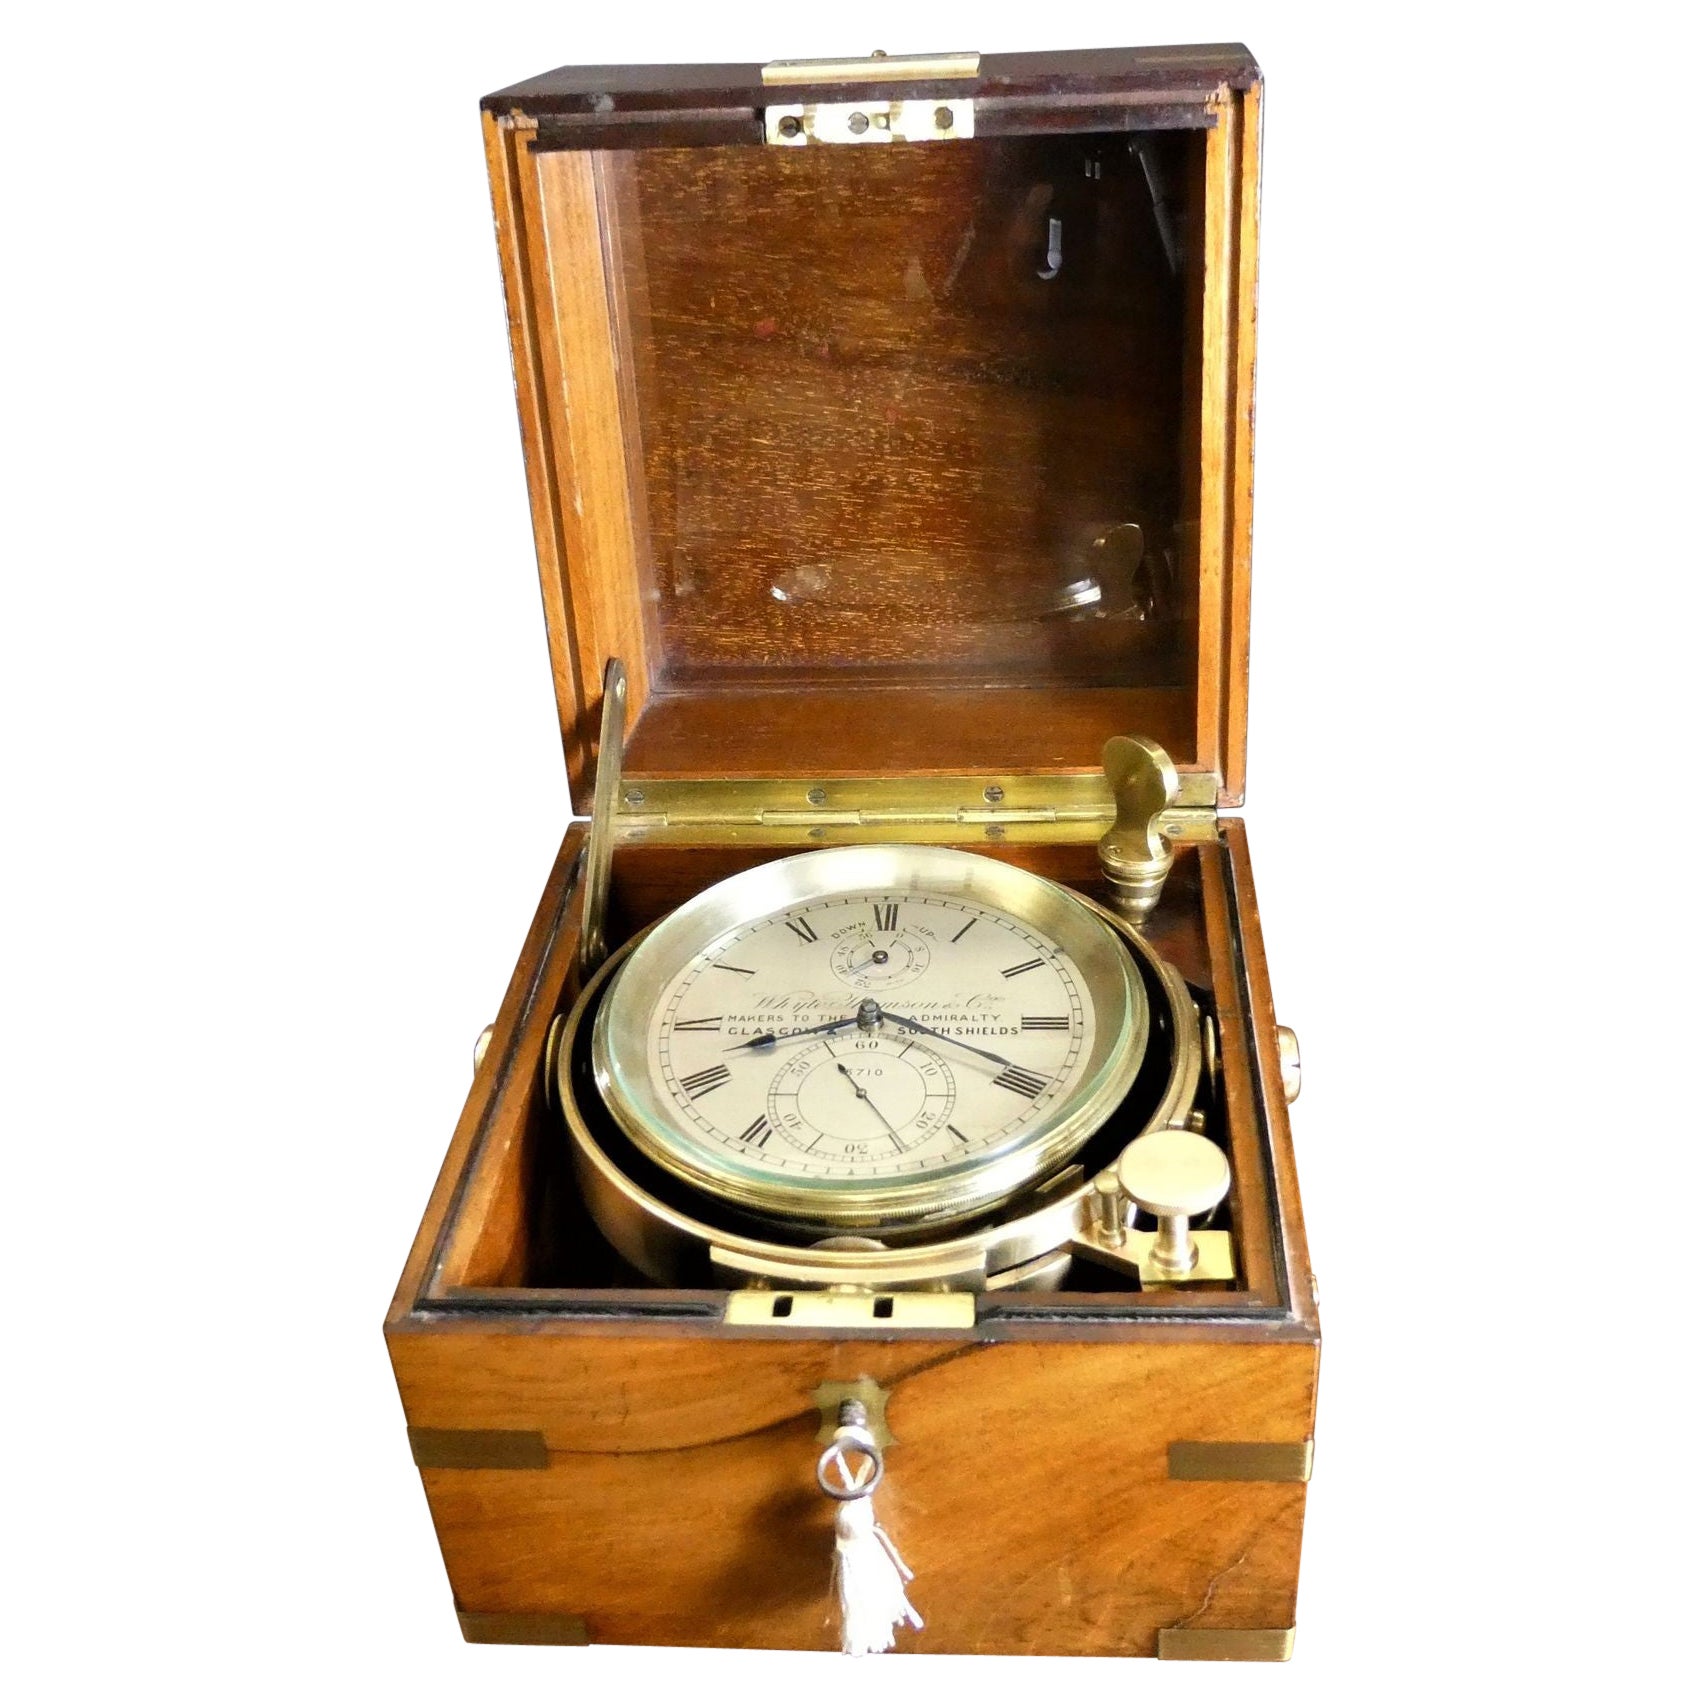 Two Day Marine Chronometer by Whyte, Thompson & Co, Glasgow and South Sheilds